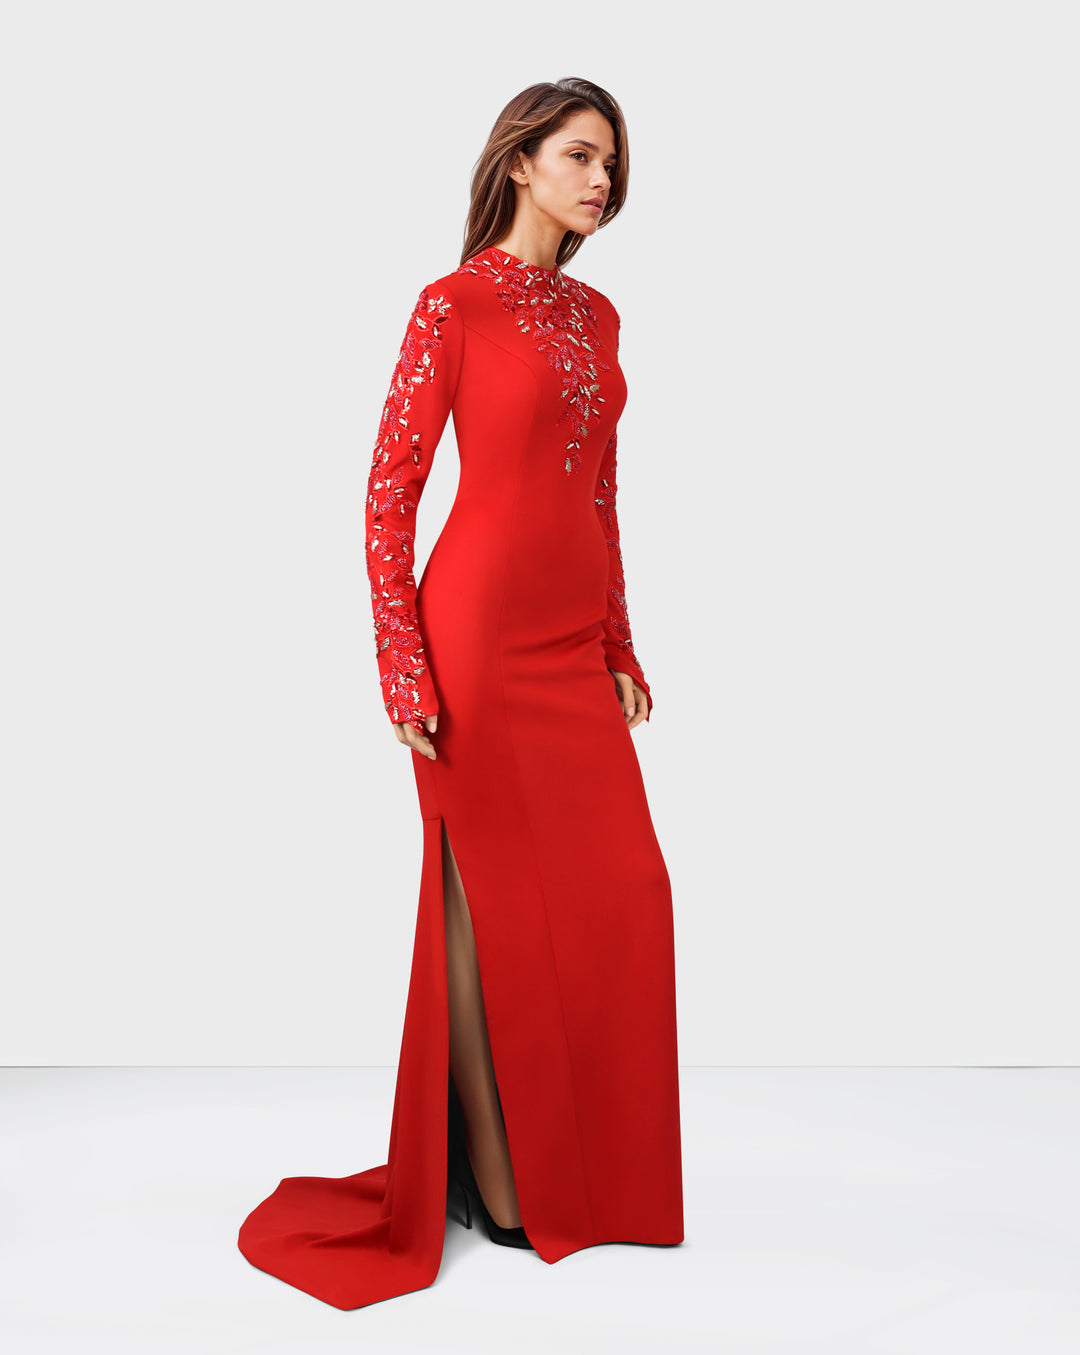 Beaded long-sleeve dress, with side slits and train